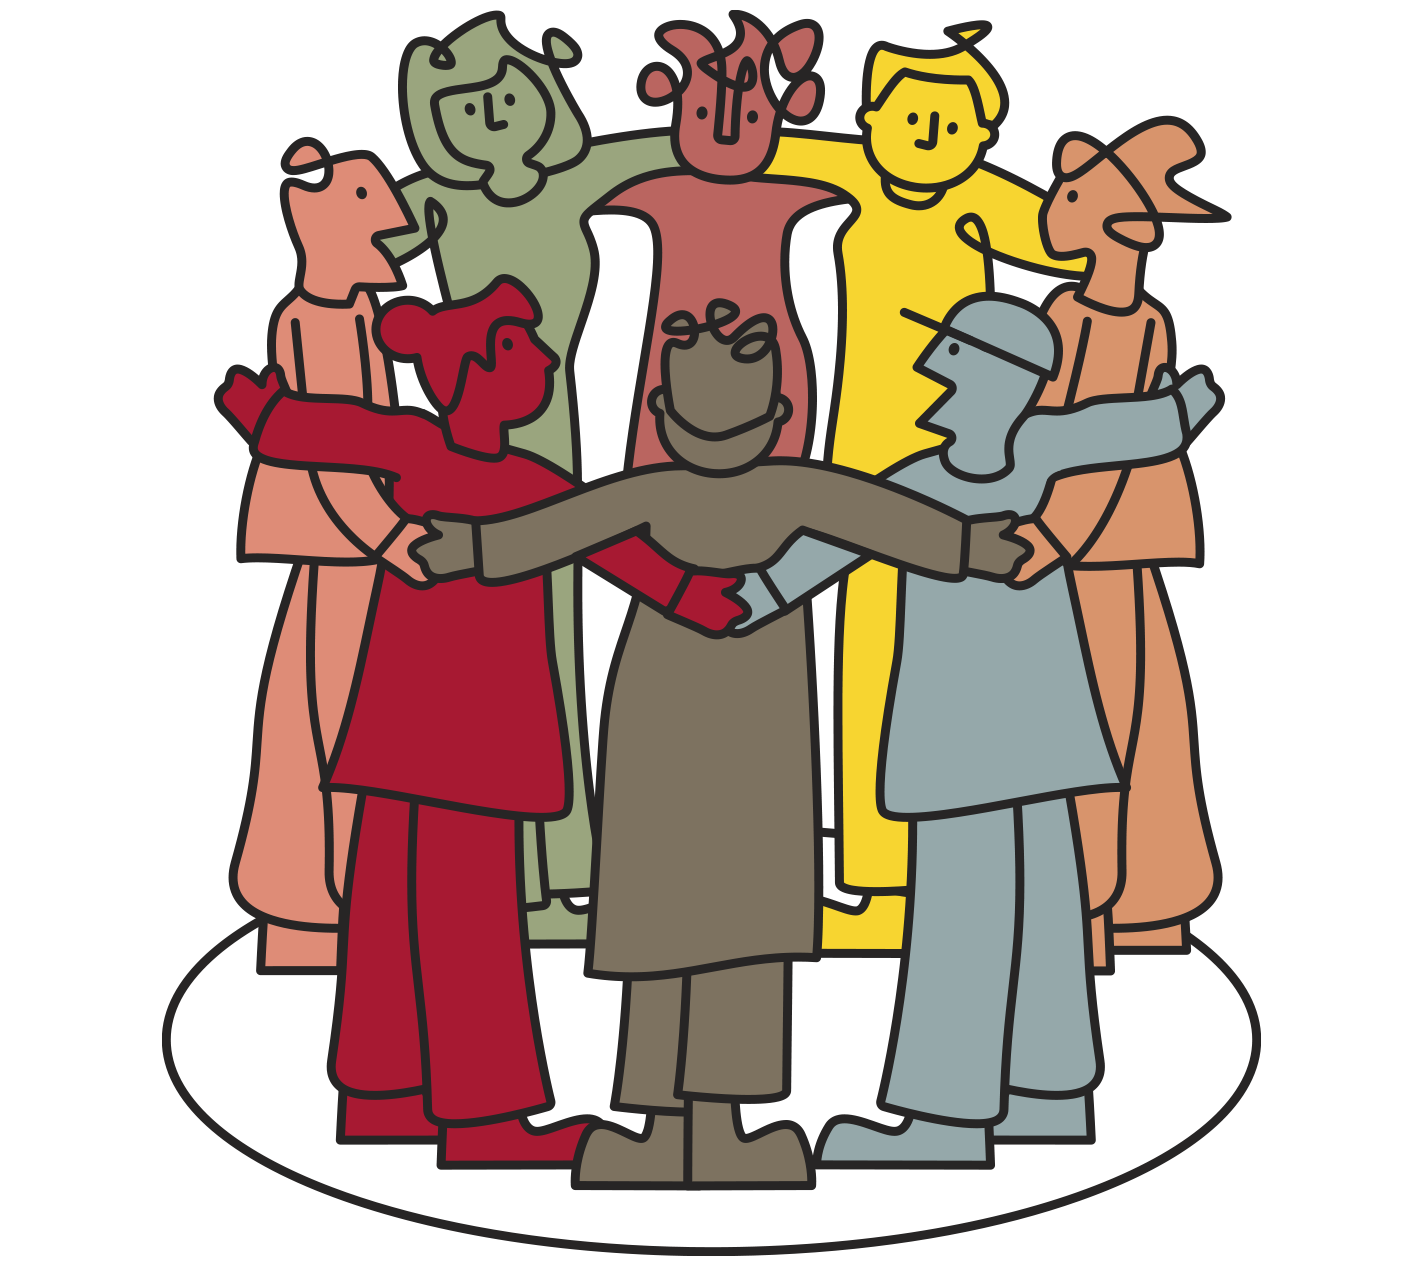 Different colored cutout figures with arms around each other in a circle